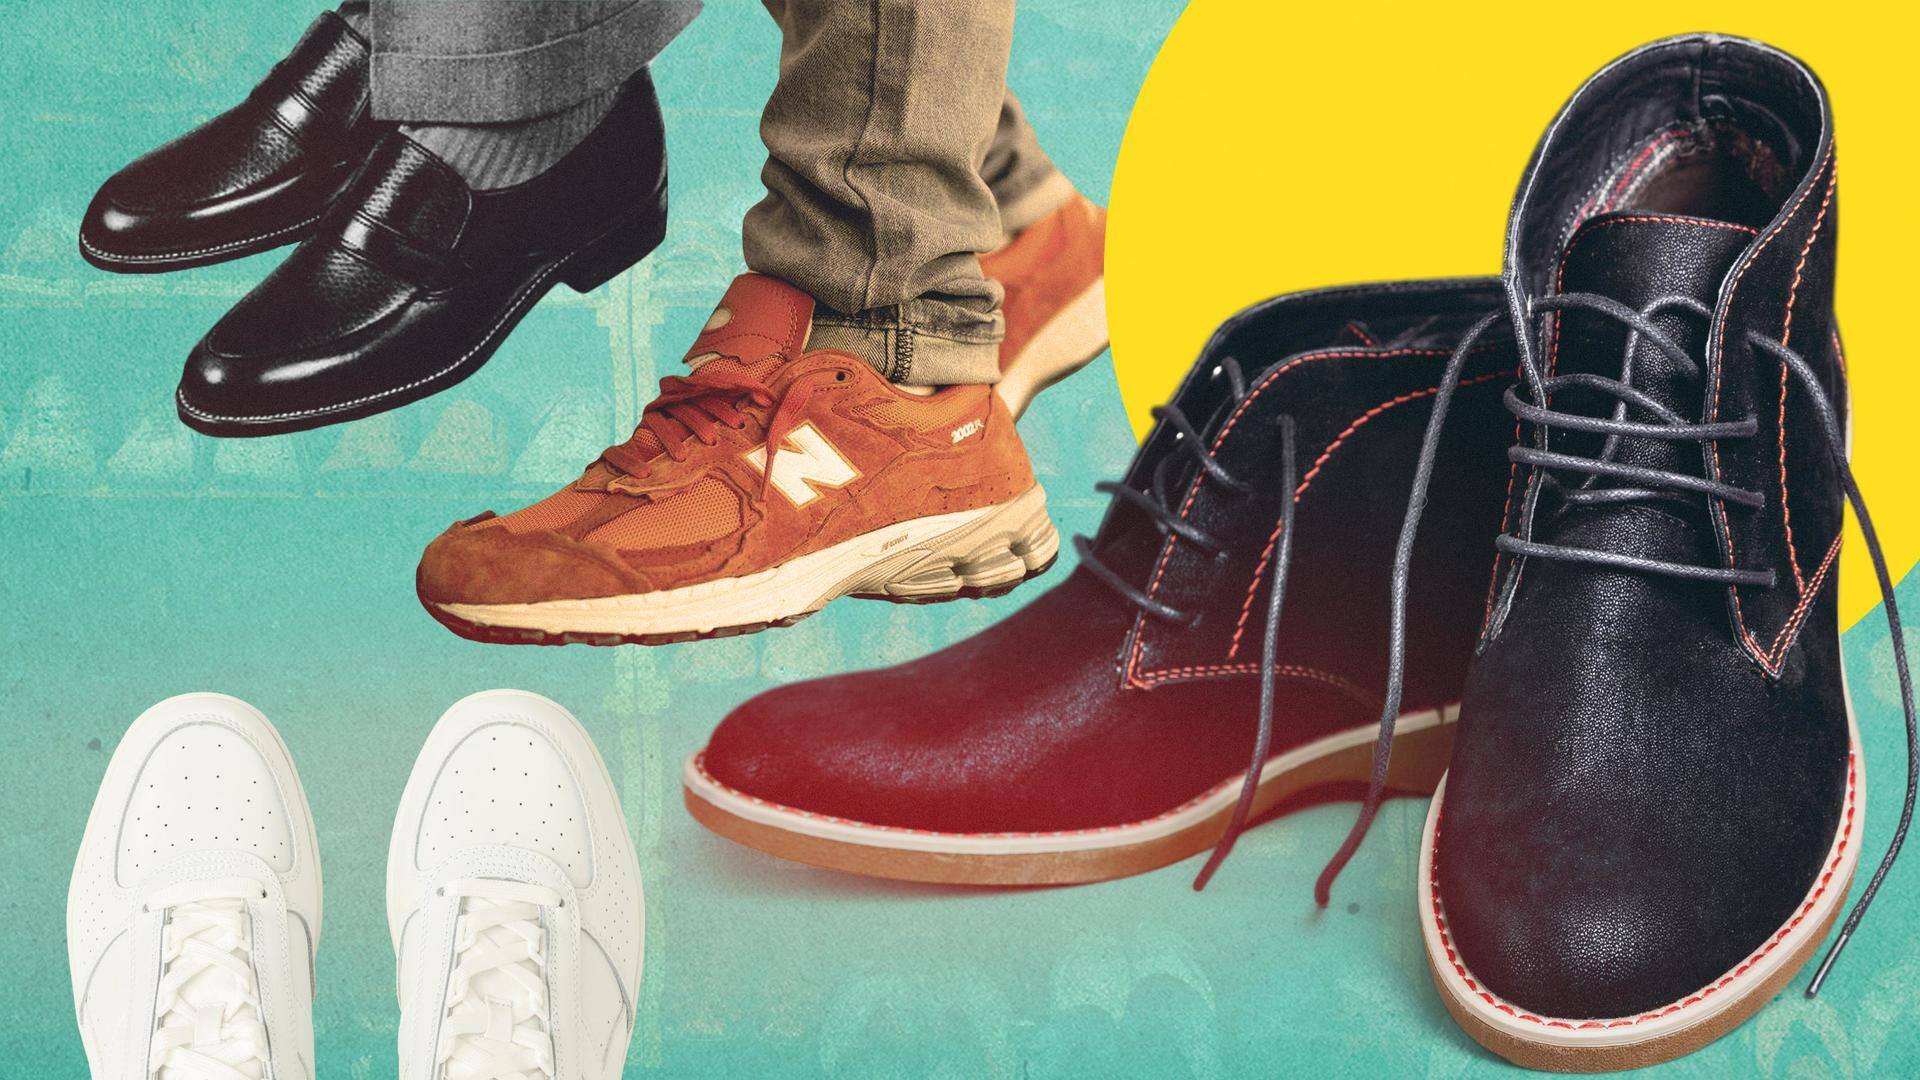 Here's what today's men prefer as footwear